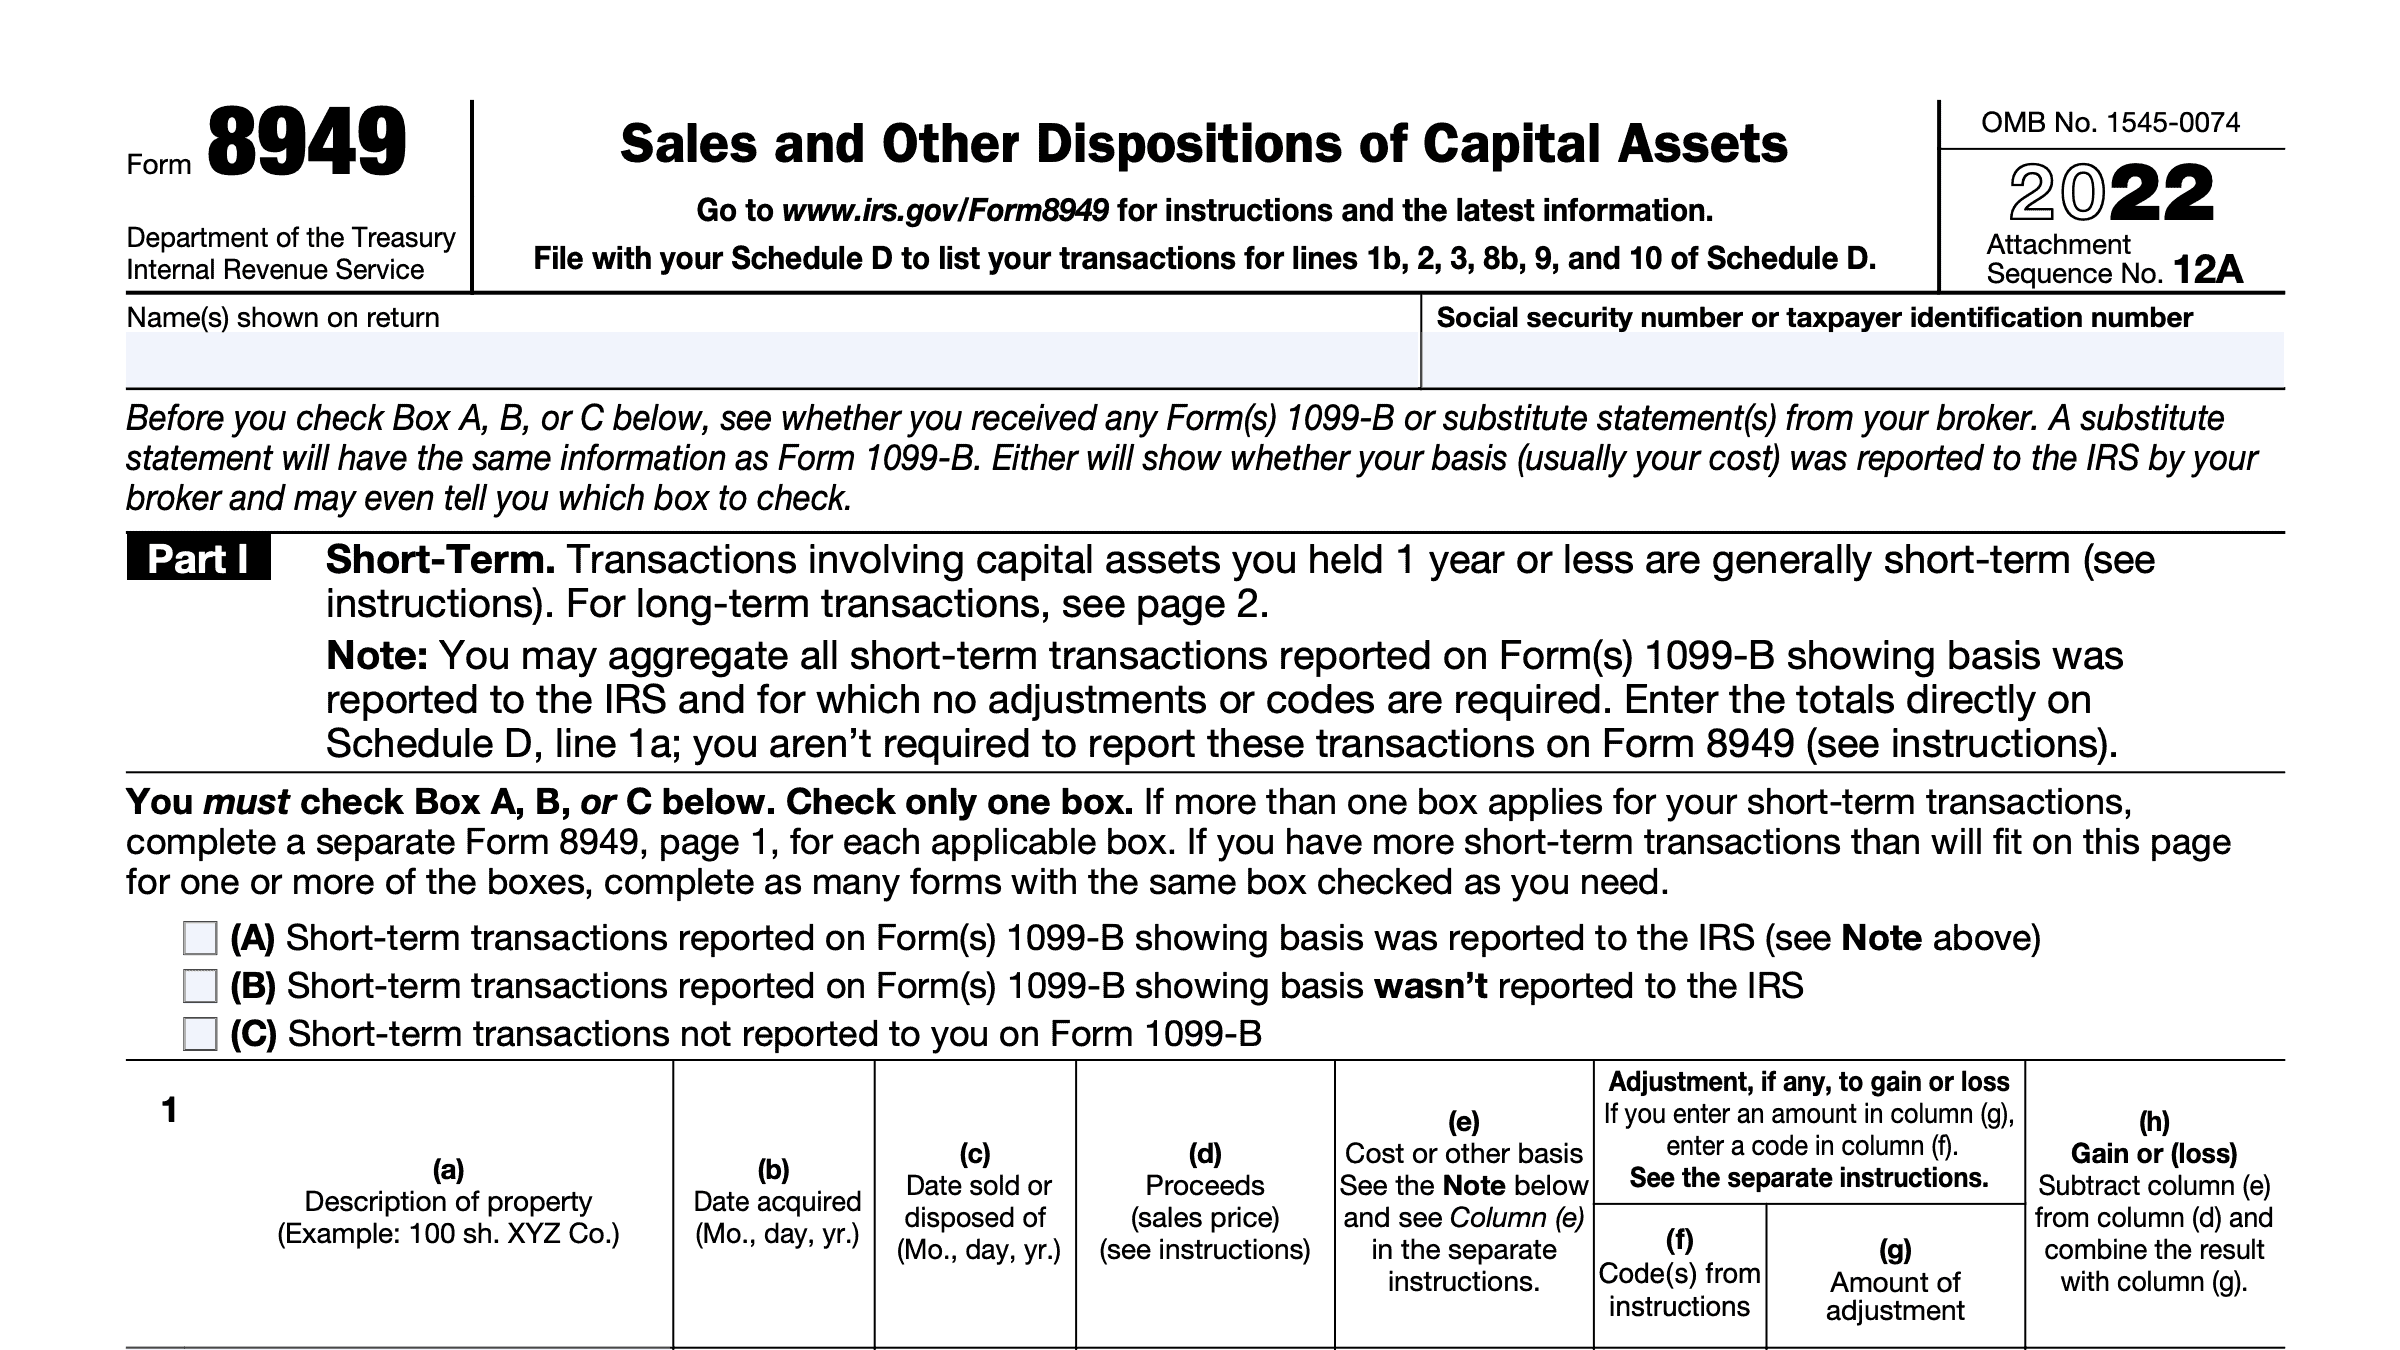 IRS Form 8949 Instructions Sales & Dispositions of Capital Assets